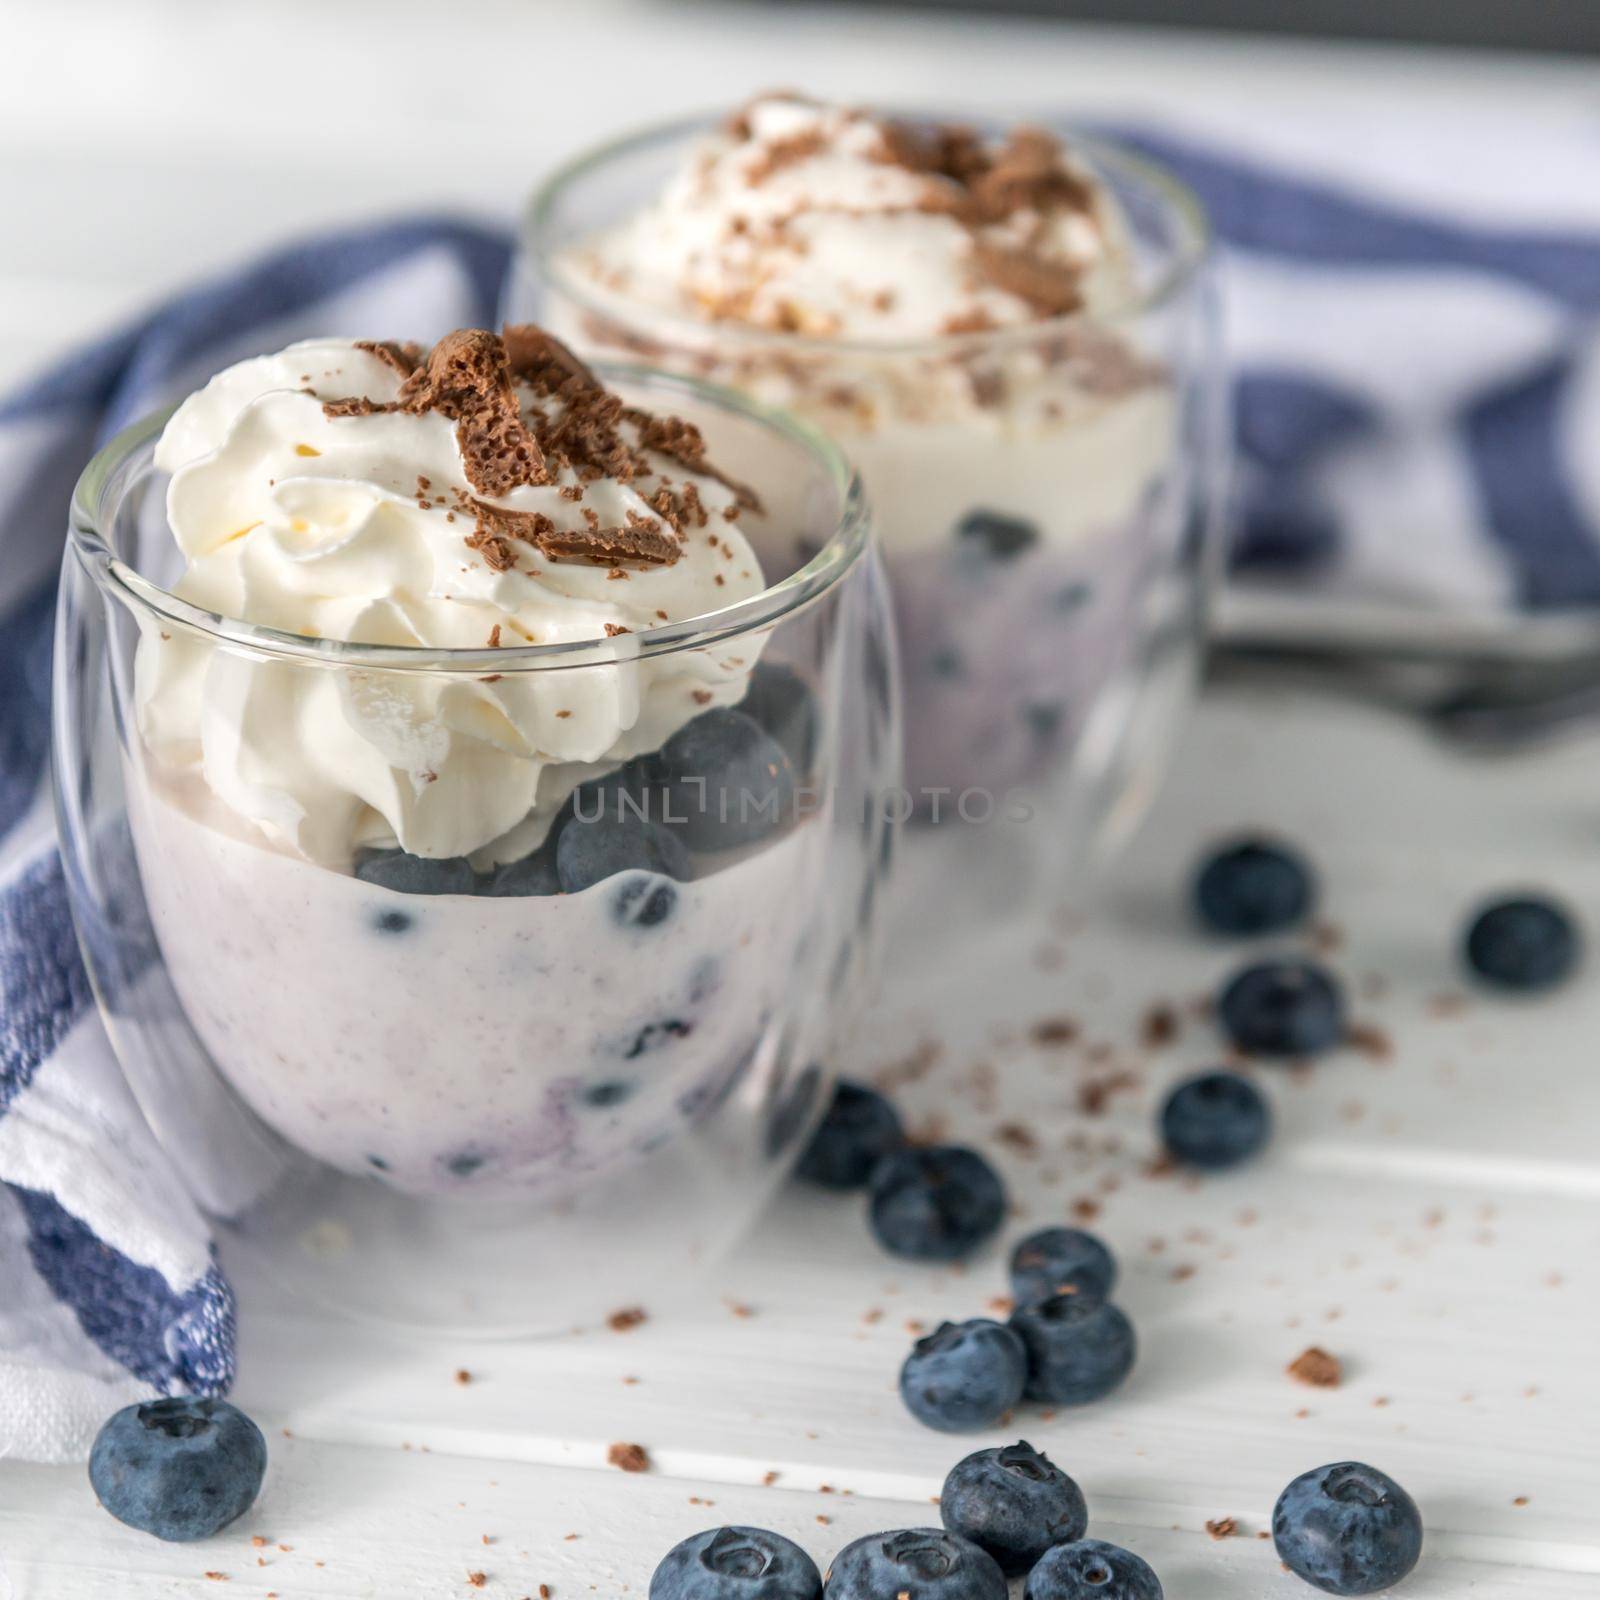 Dessert from yogurt with blueberries and chocolate on a white wooden background